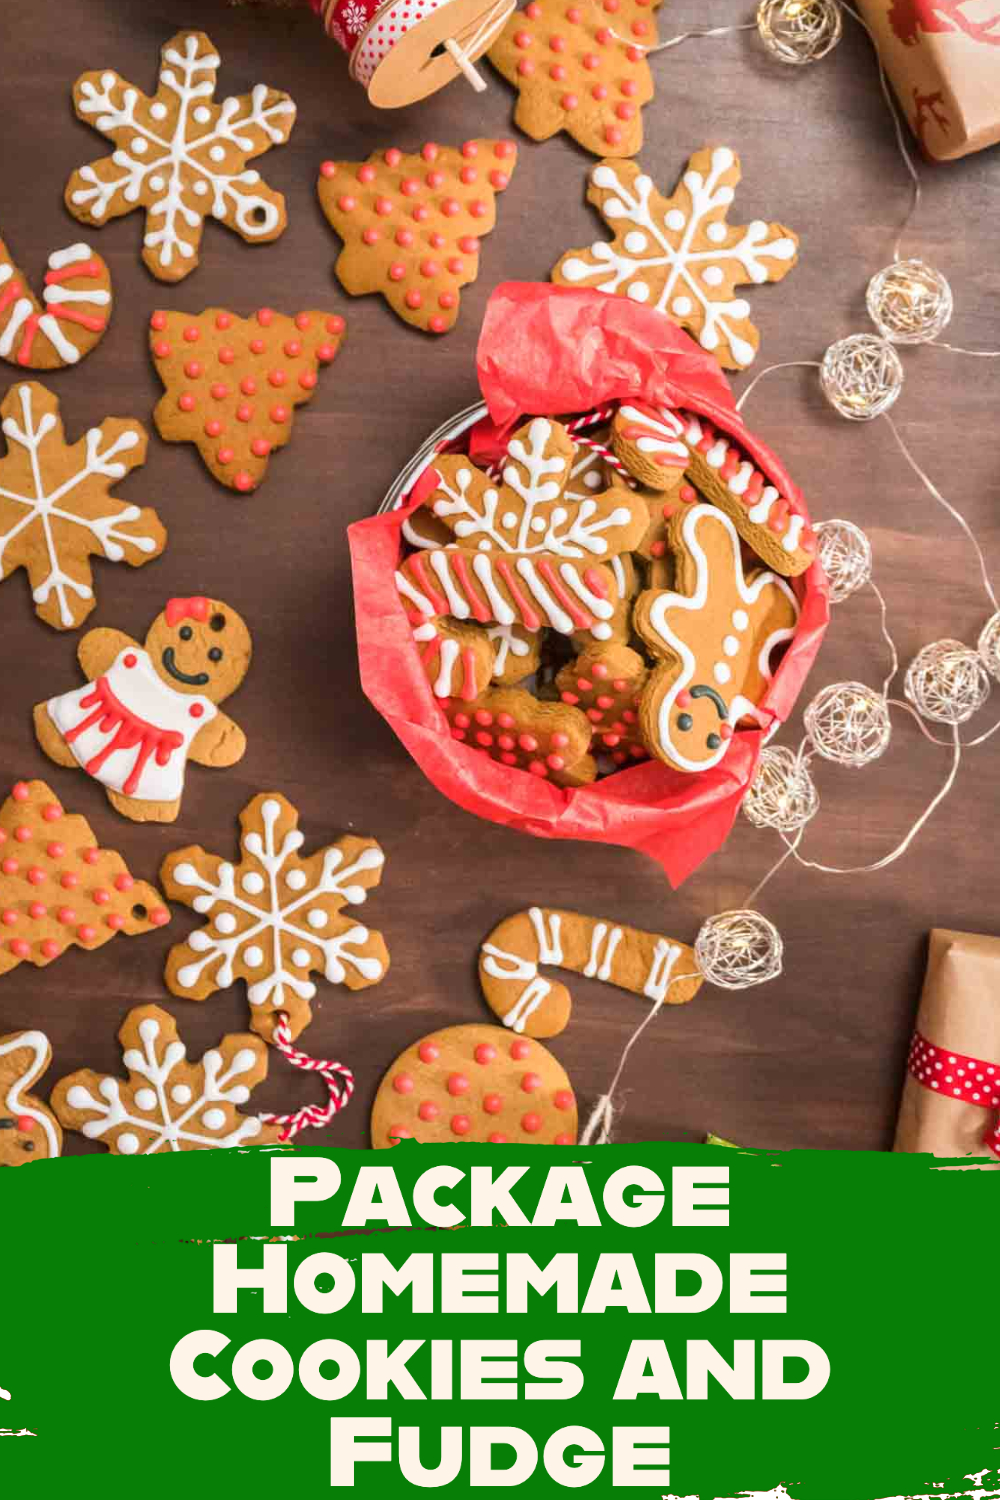 Package Homemade Cookies and Fudge